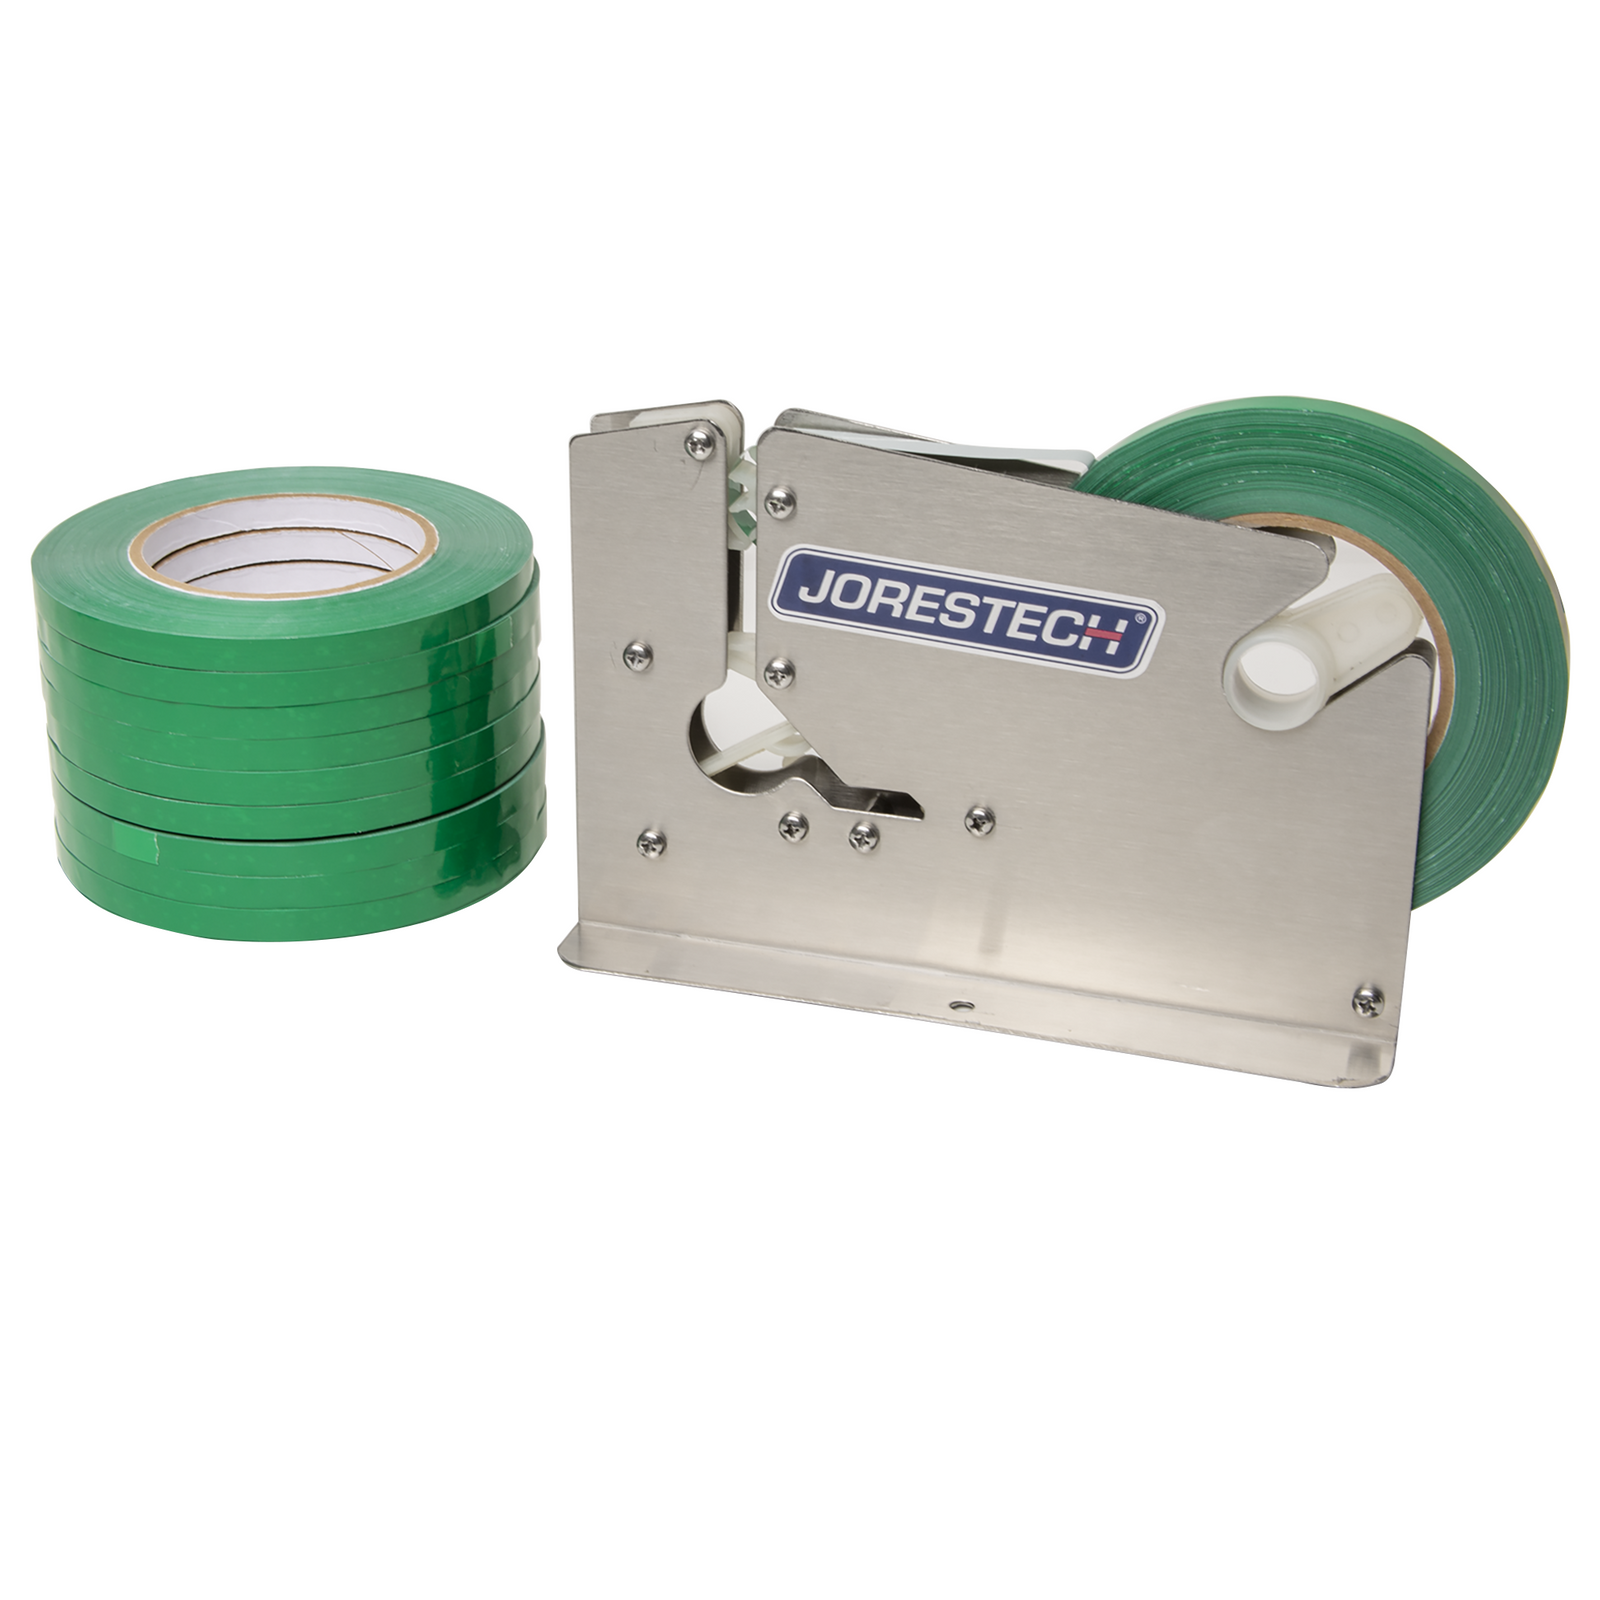 A stainless steel bag closer next to 10 adhesive green tape rolls